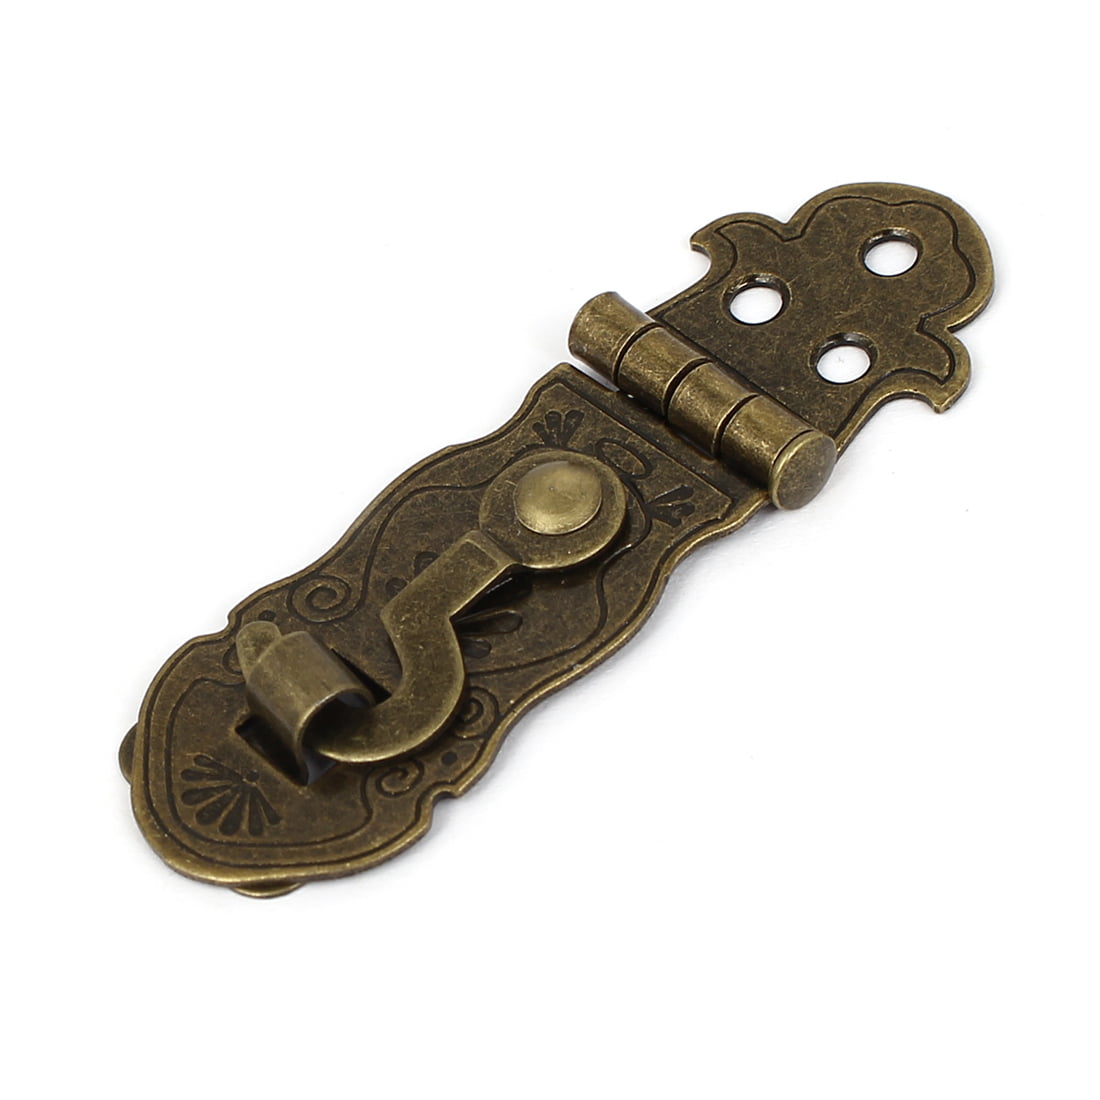 2 small 2.12 Trunk Catch Hasp latch for Suitcase box old Style Lock 6.5 cm Solid Heavy brass vintage deco style